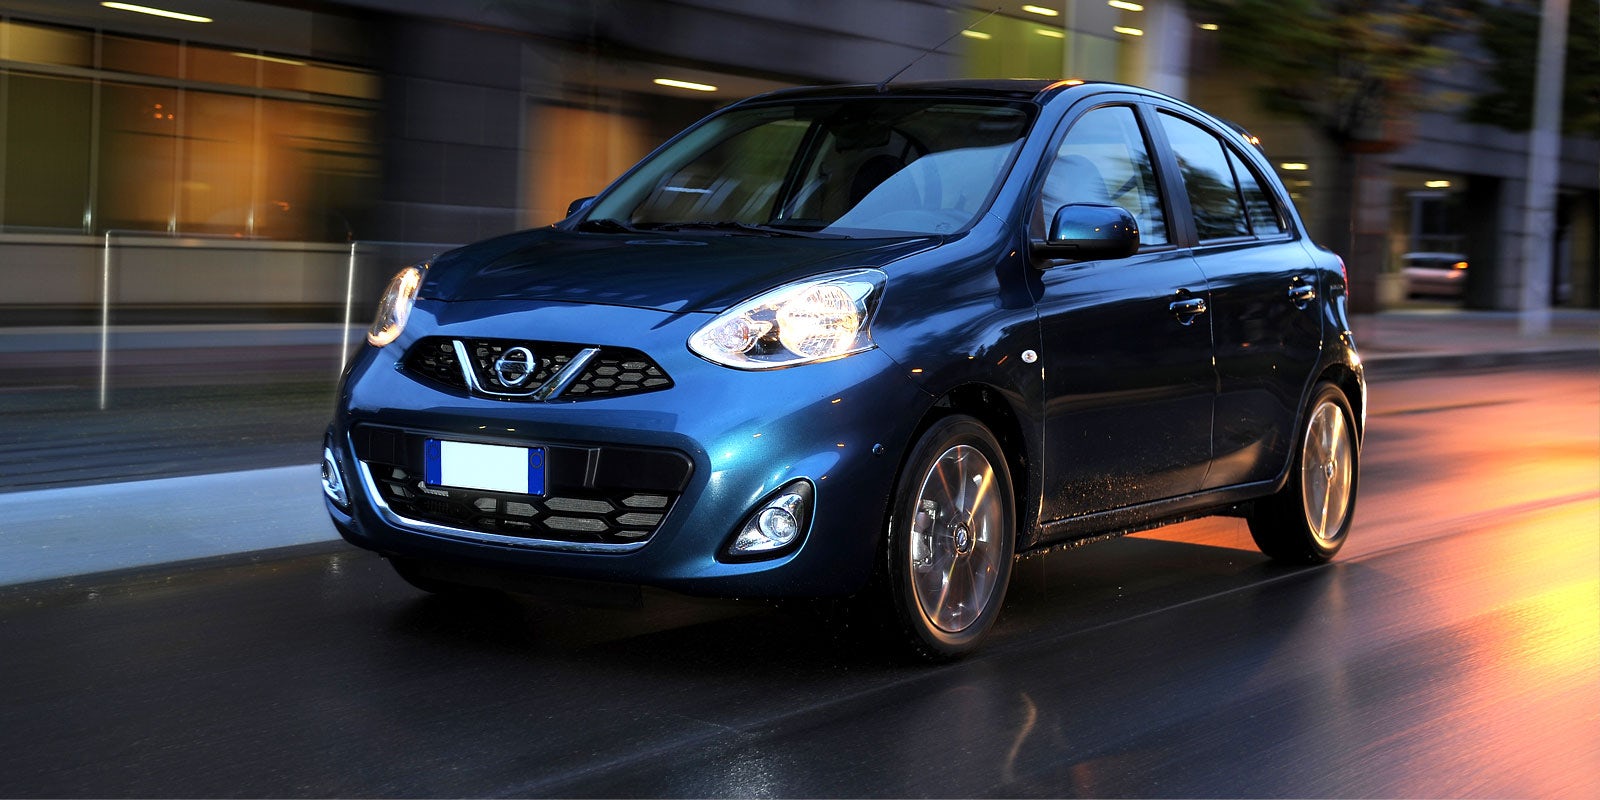 Do you get what you pay for with the cheap Nissan Micra?